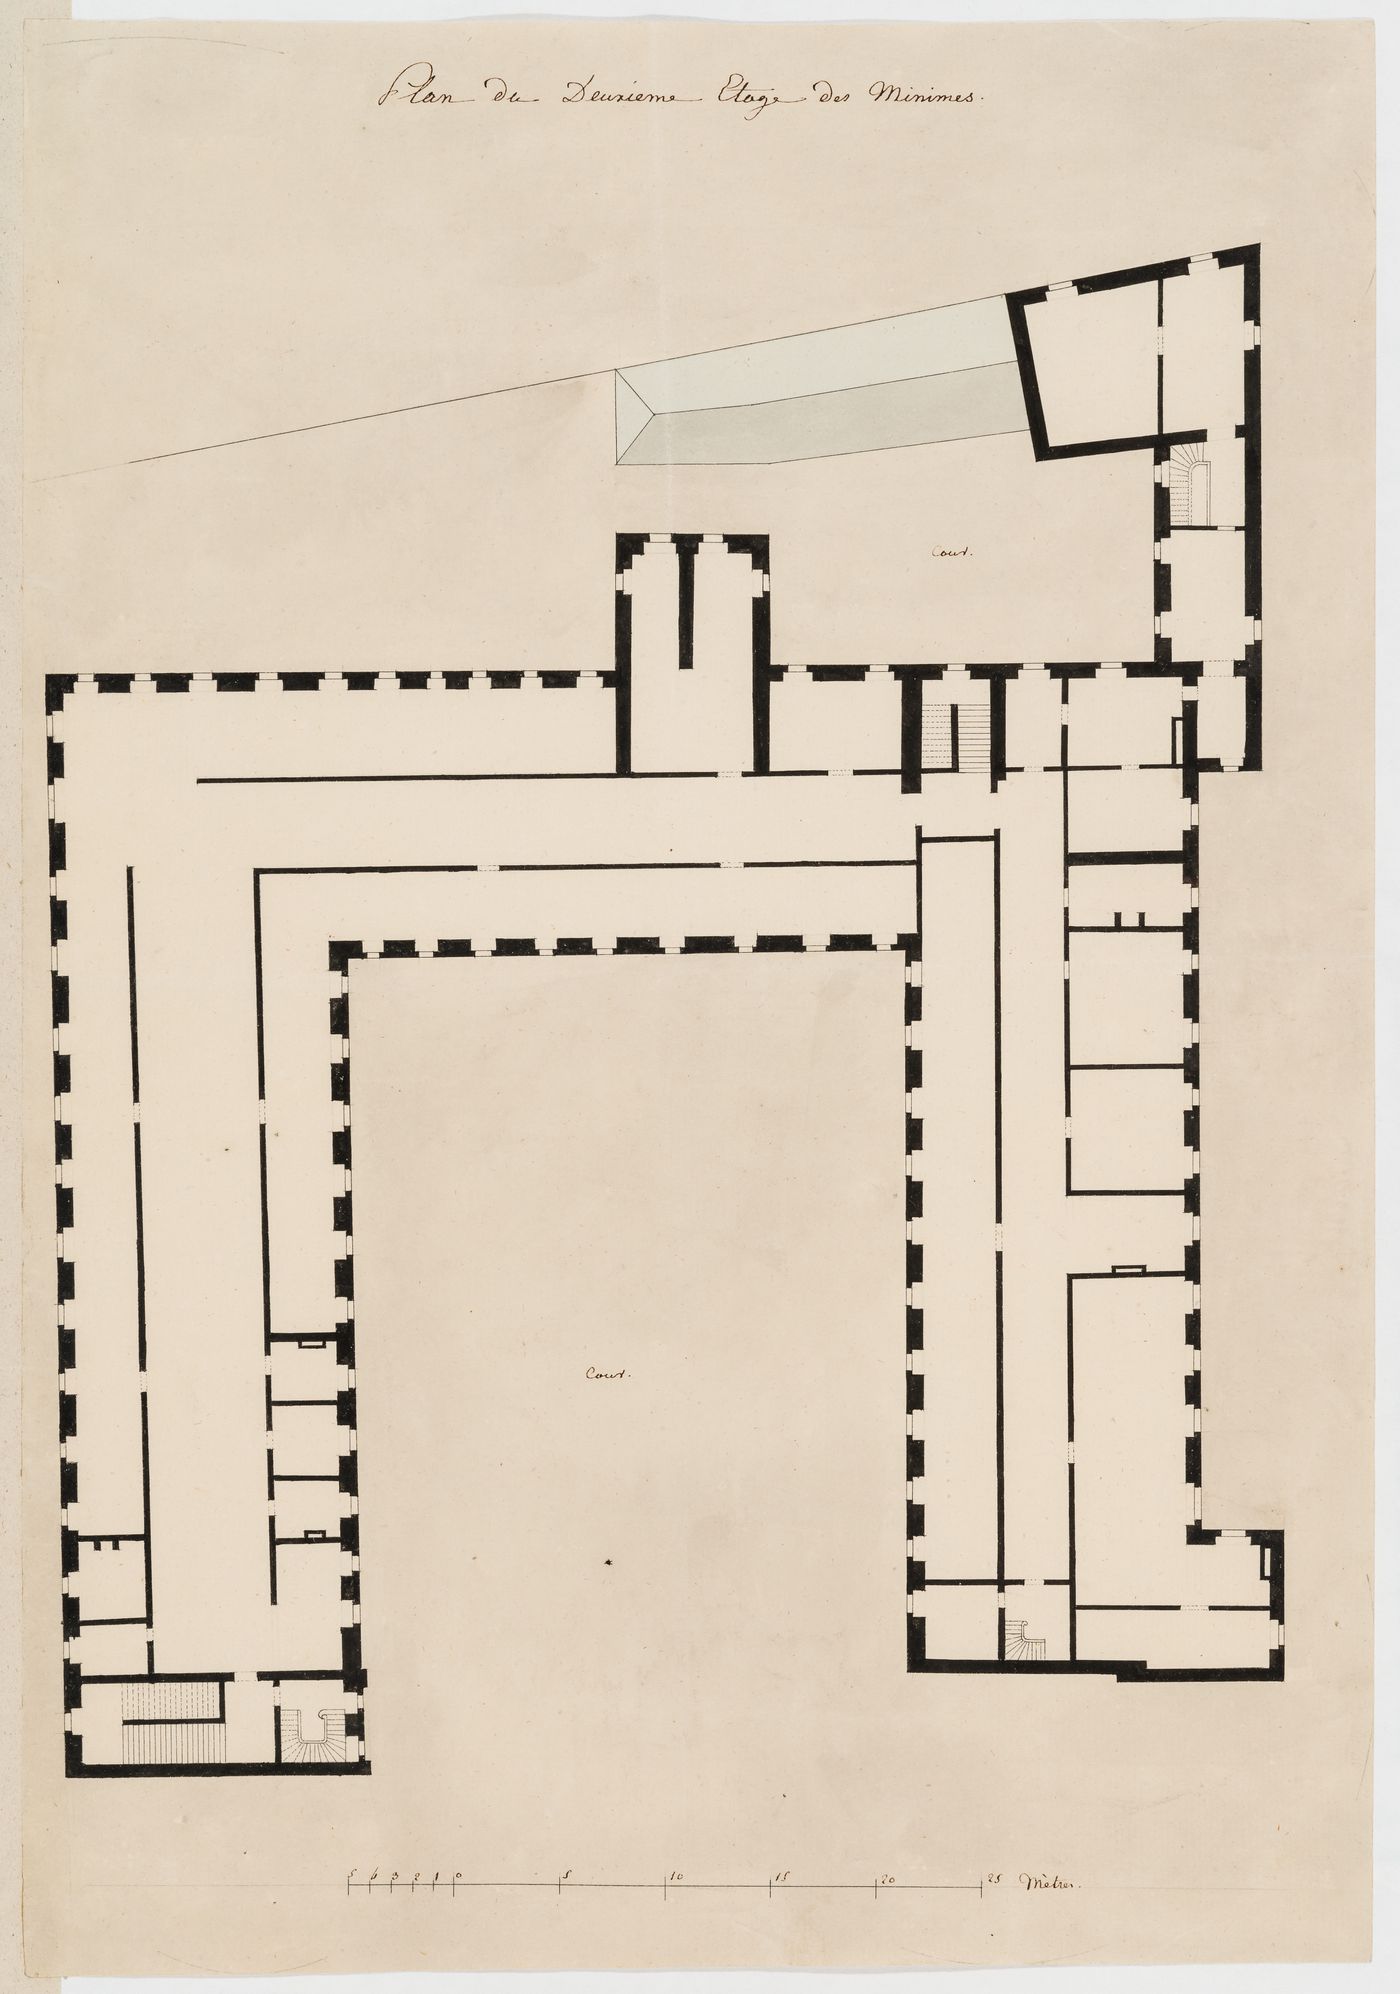 Project for alterations to the Caserne des Minimes, rue des Minimes: Second floor plan